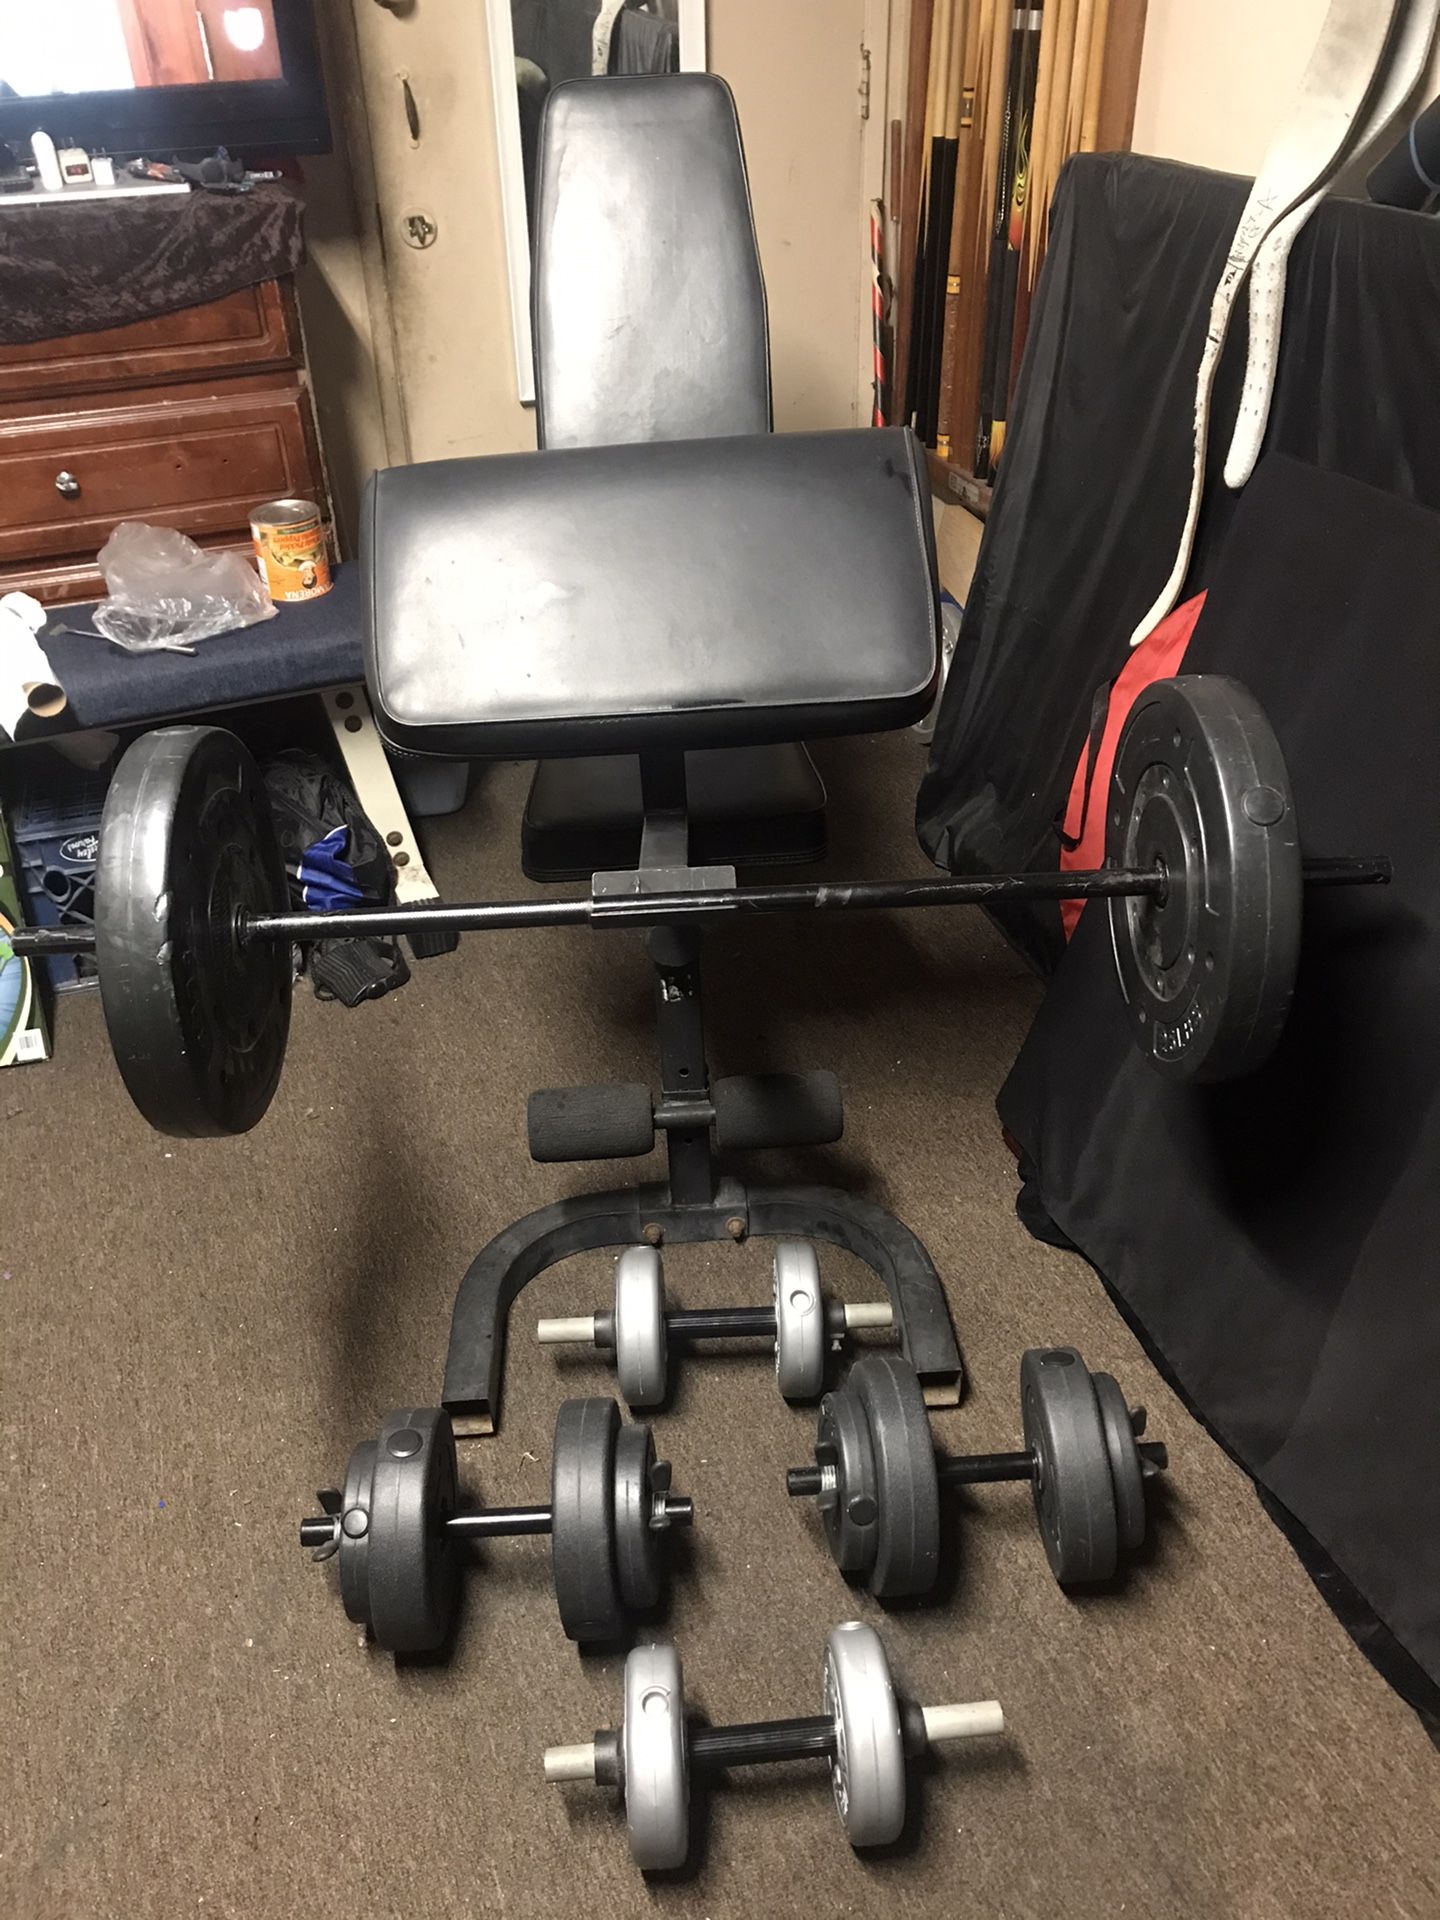 ADJUSTABLE WEIGHT CURL BENCH and DUMBBELLS and BAR is 4ft LONG and 100 LBS PLATES